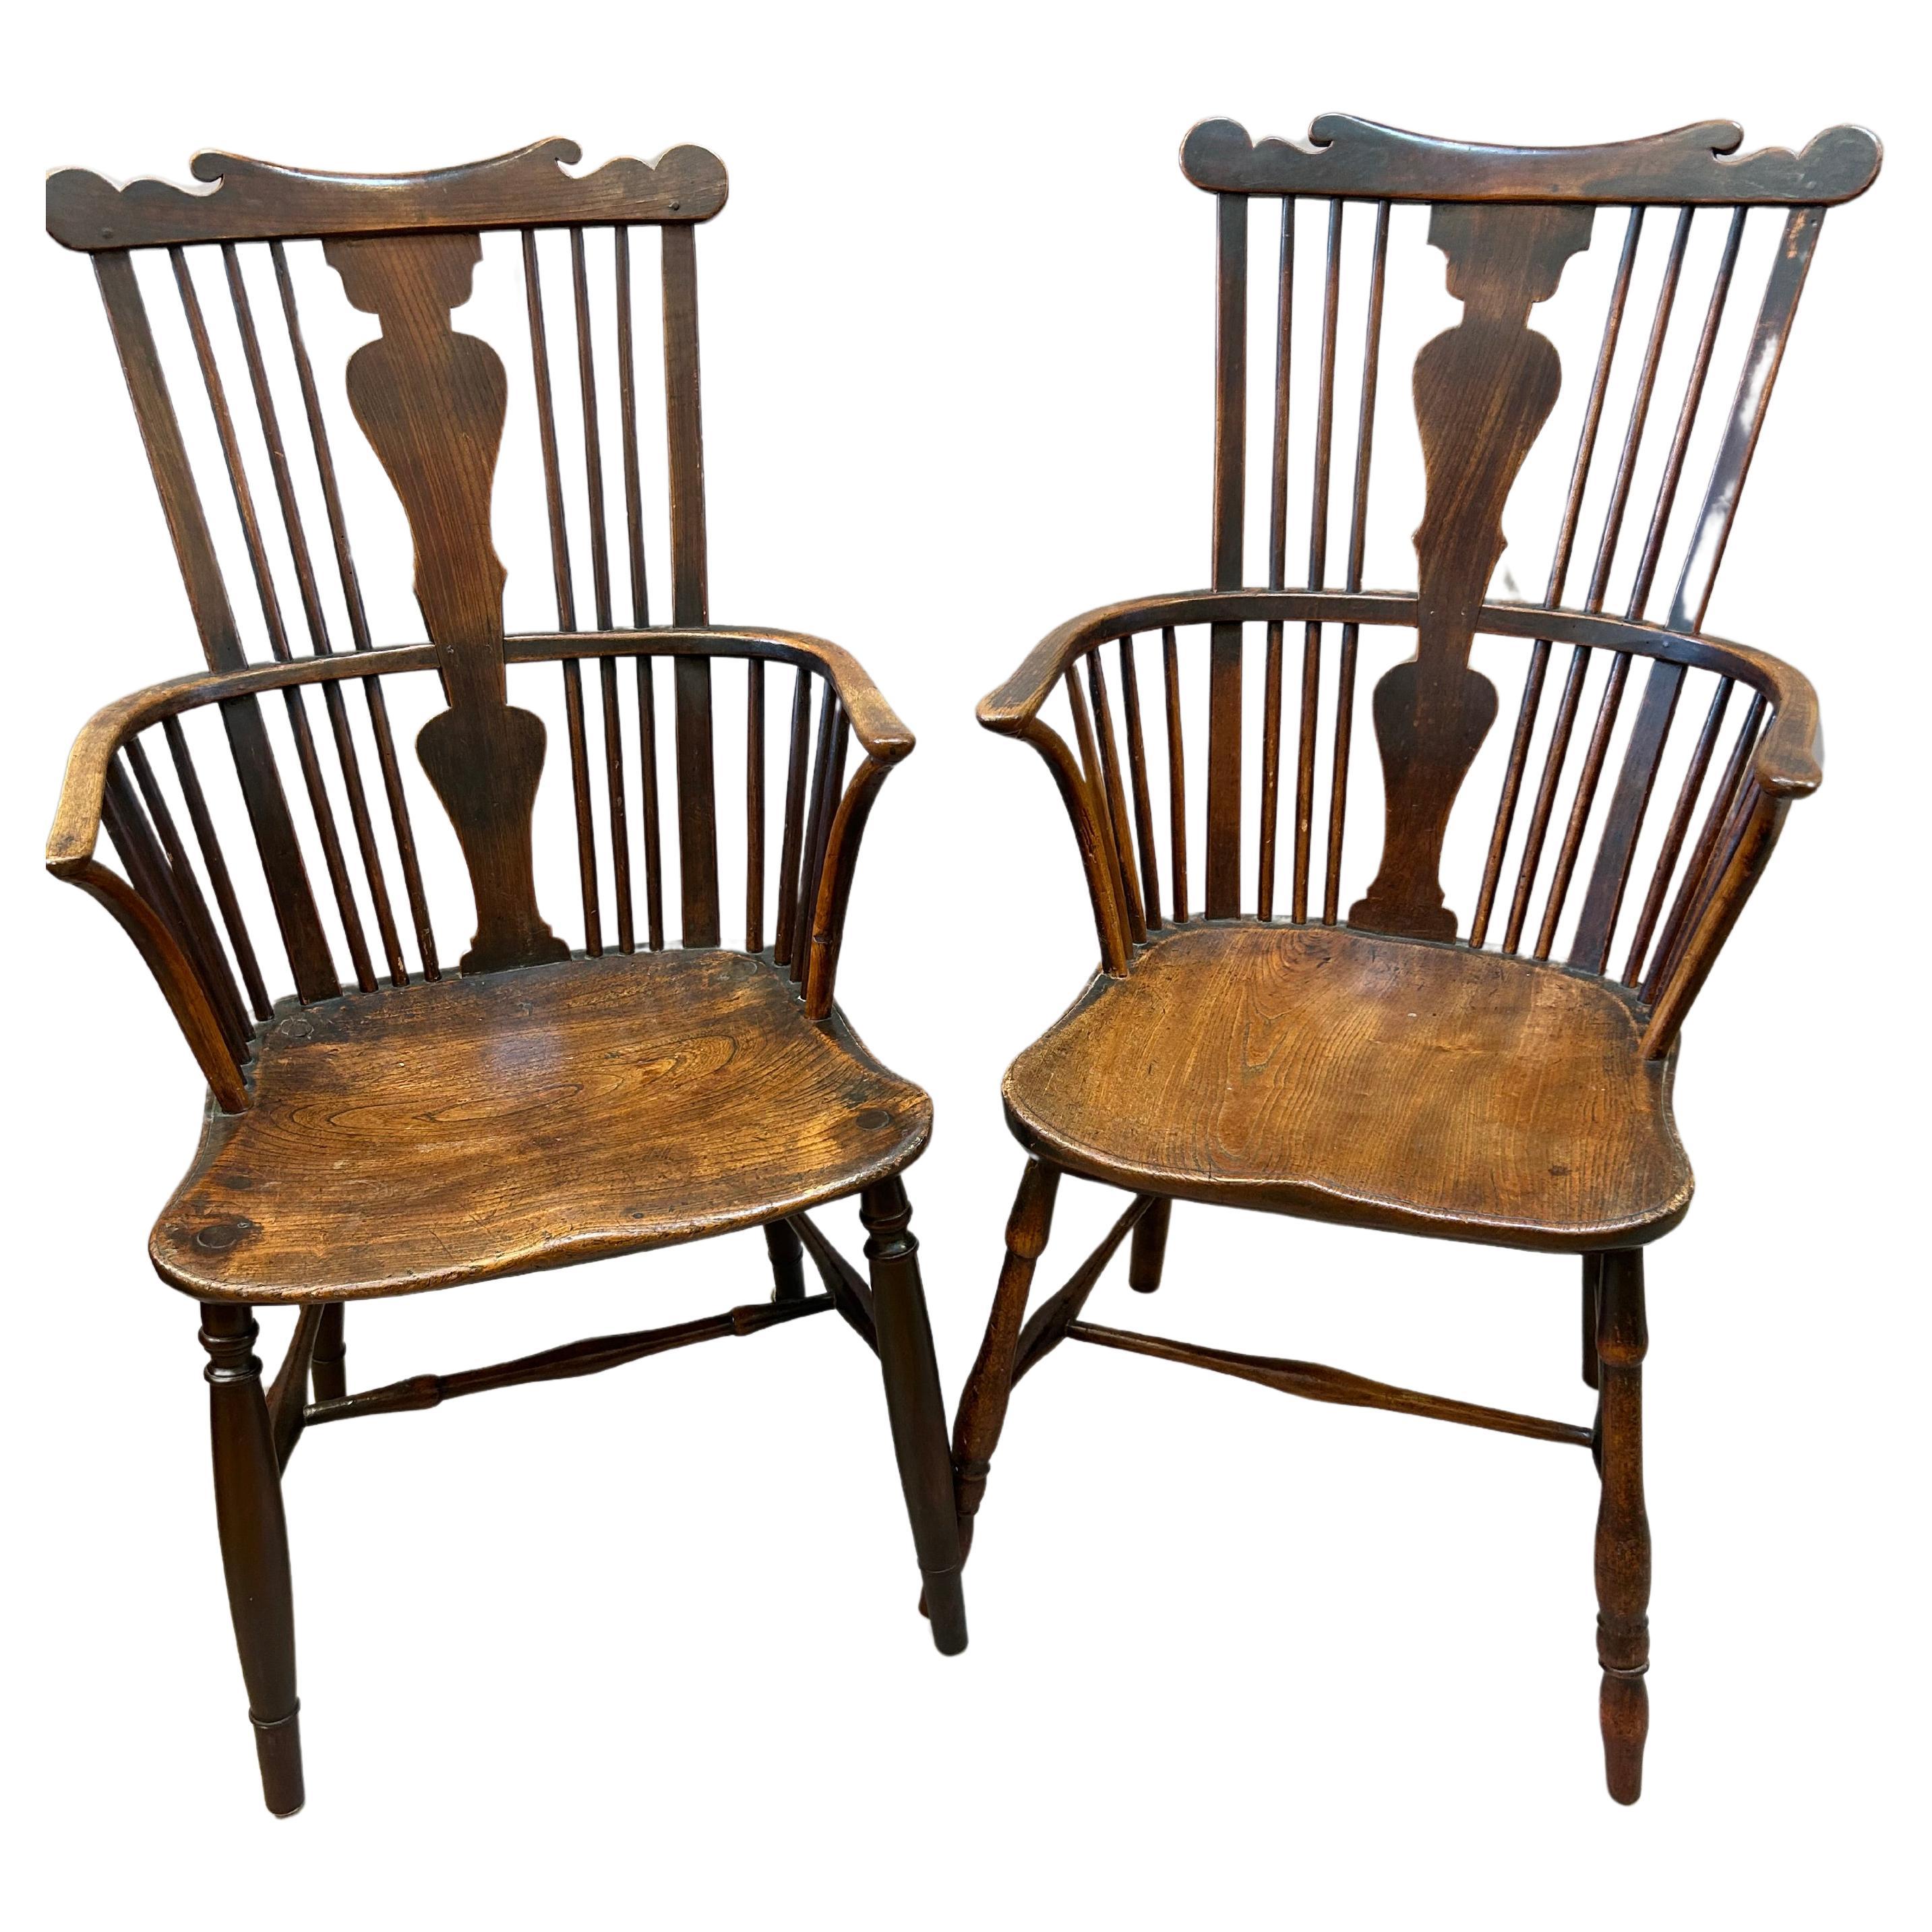 Pair of 18th Century English Comb Back Windsor Armchairs. For Sale